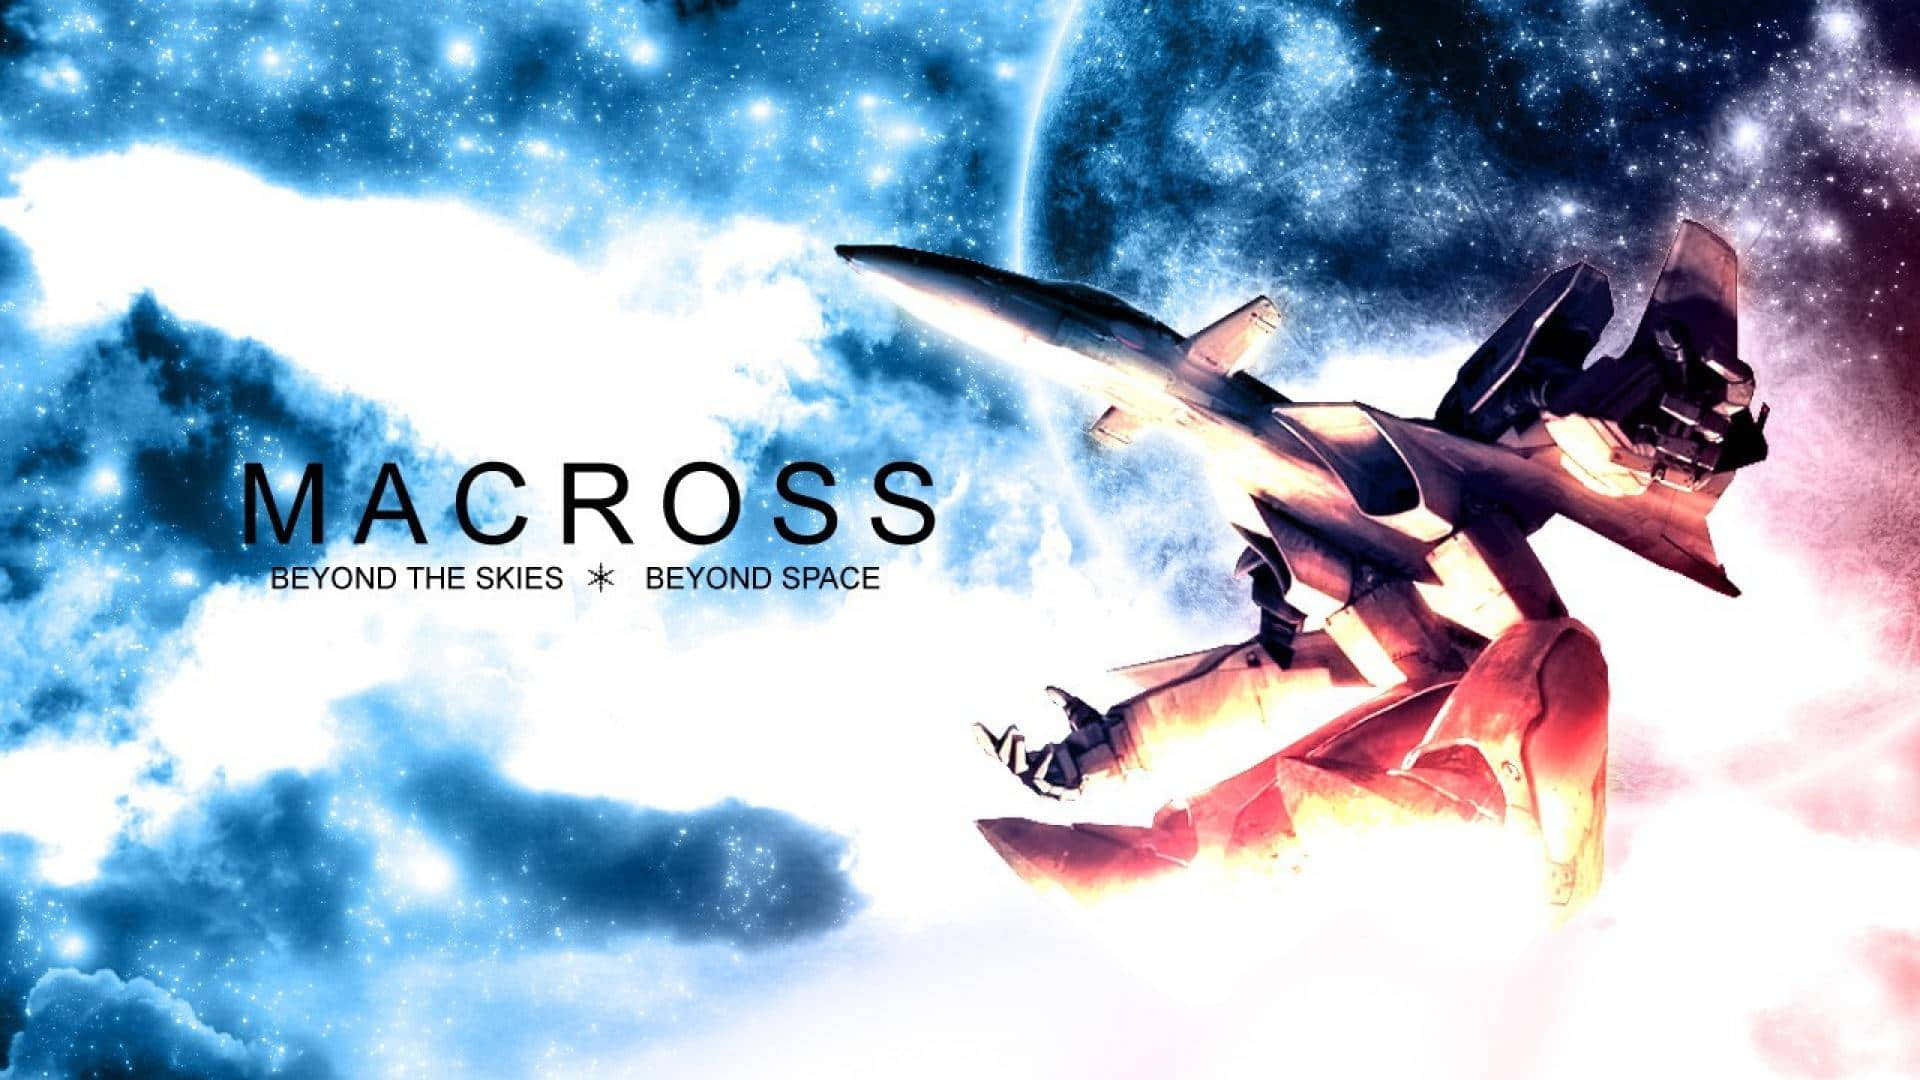 “Join the Macross Delta squadron and become a fighter ace!” Wallpaper